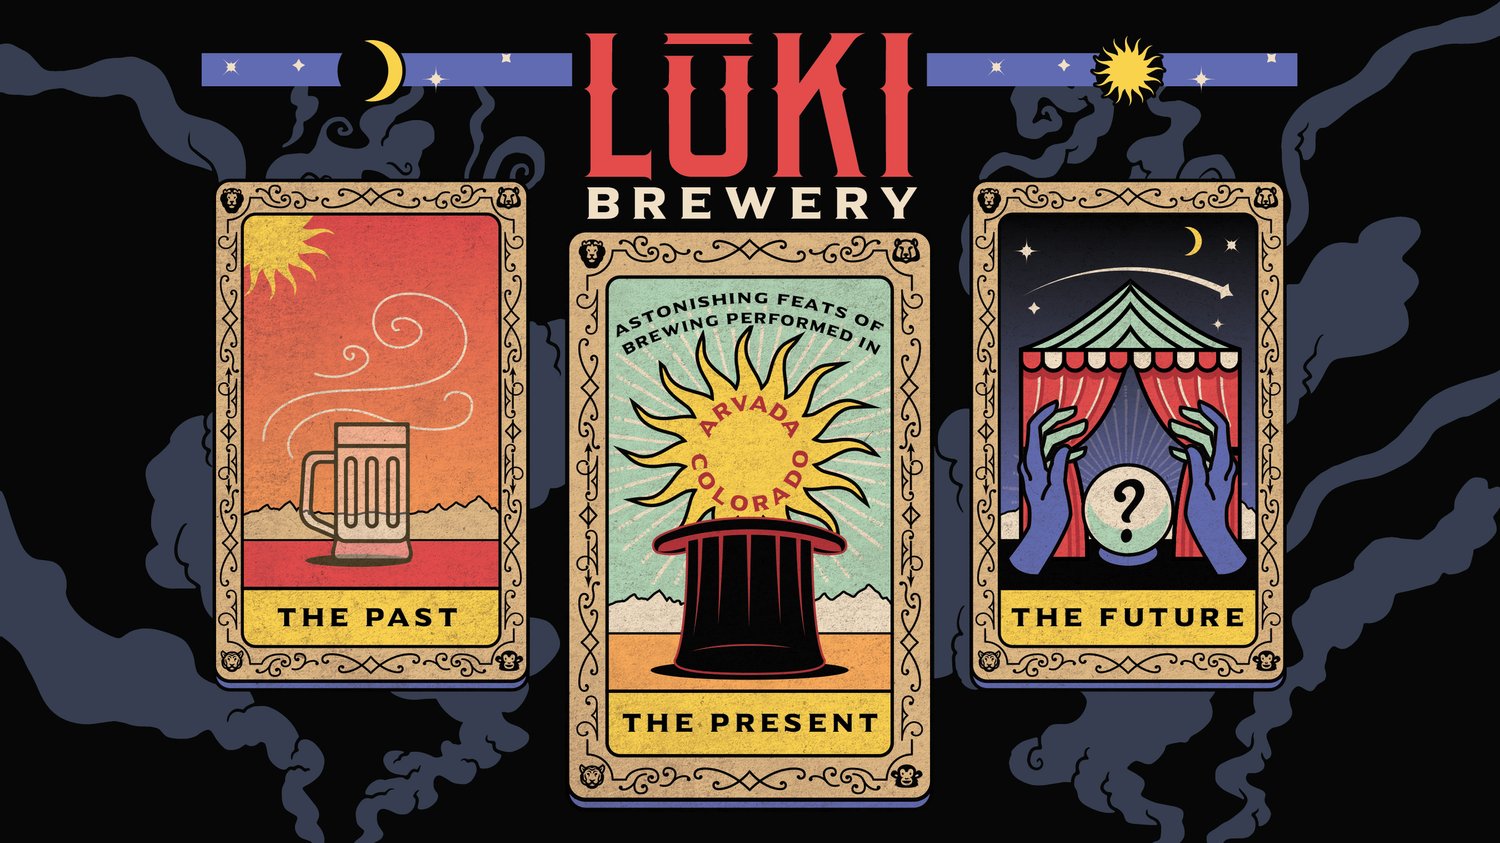 LUKI Brewery Celebrates Two-Year Anniversary July 15-17 with Magic and Mysticism Themed Soiree